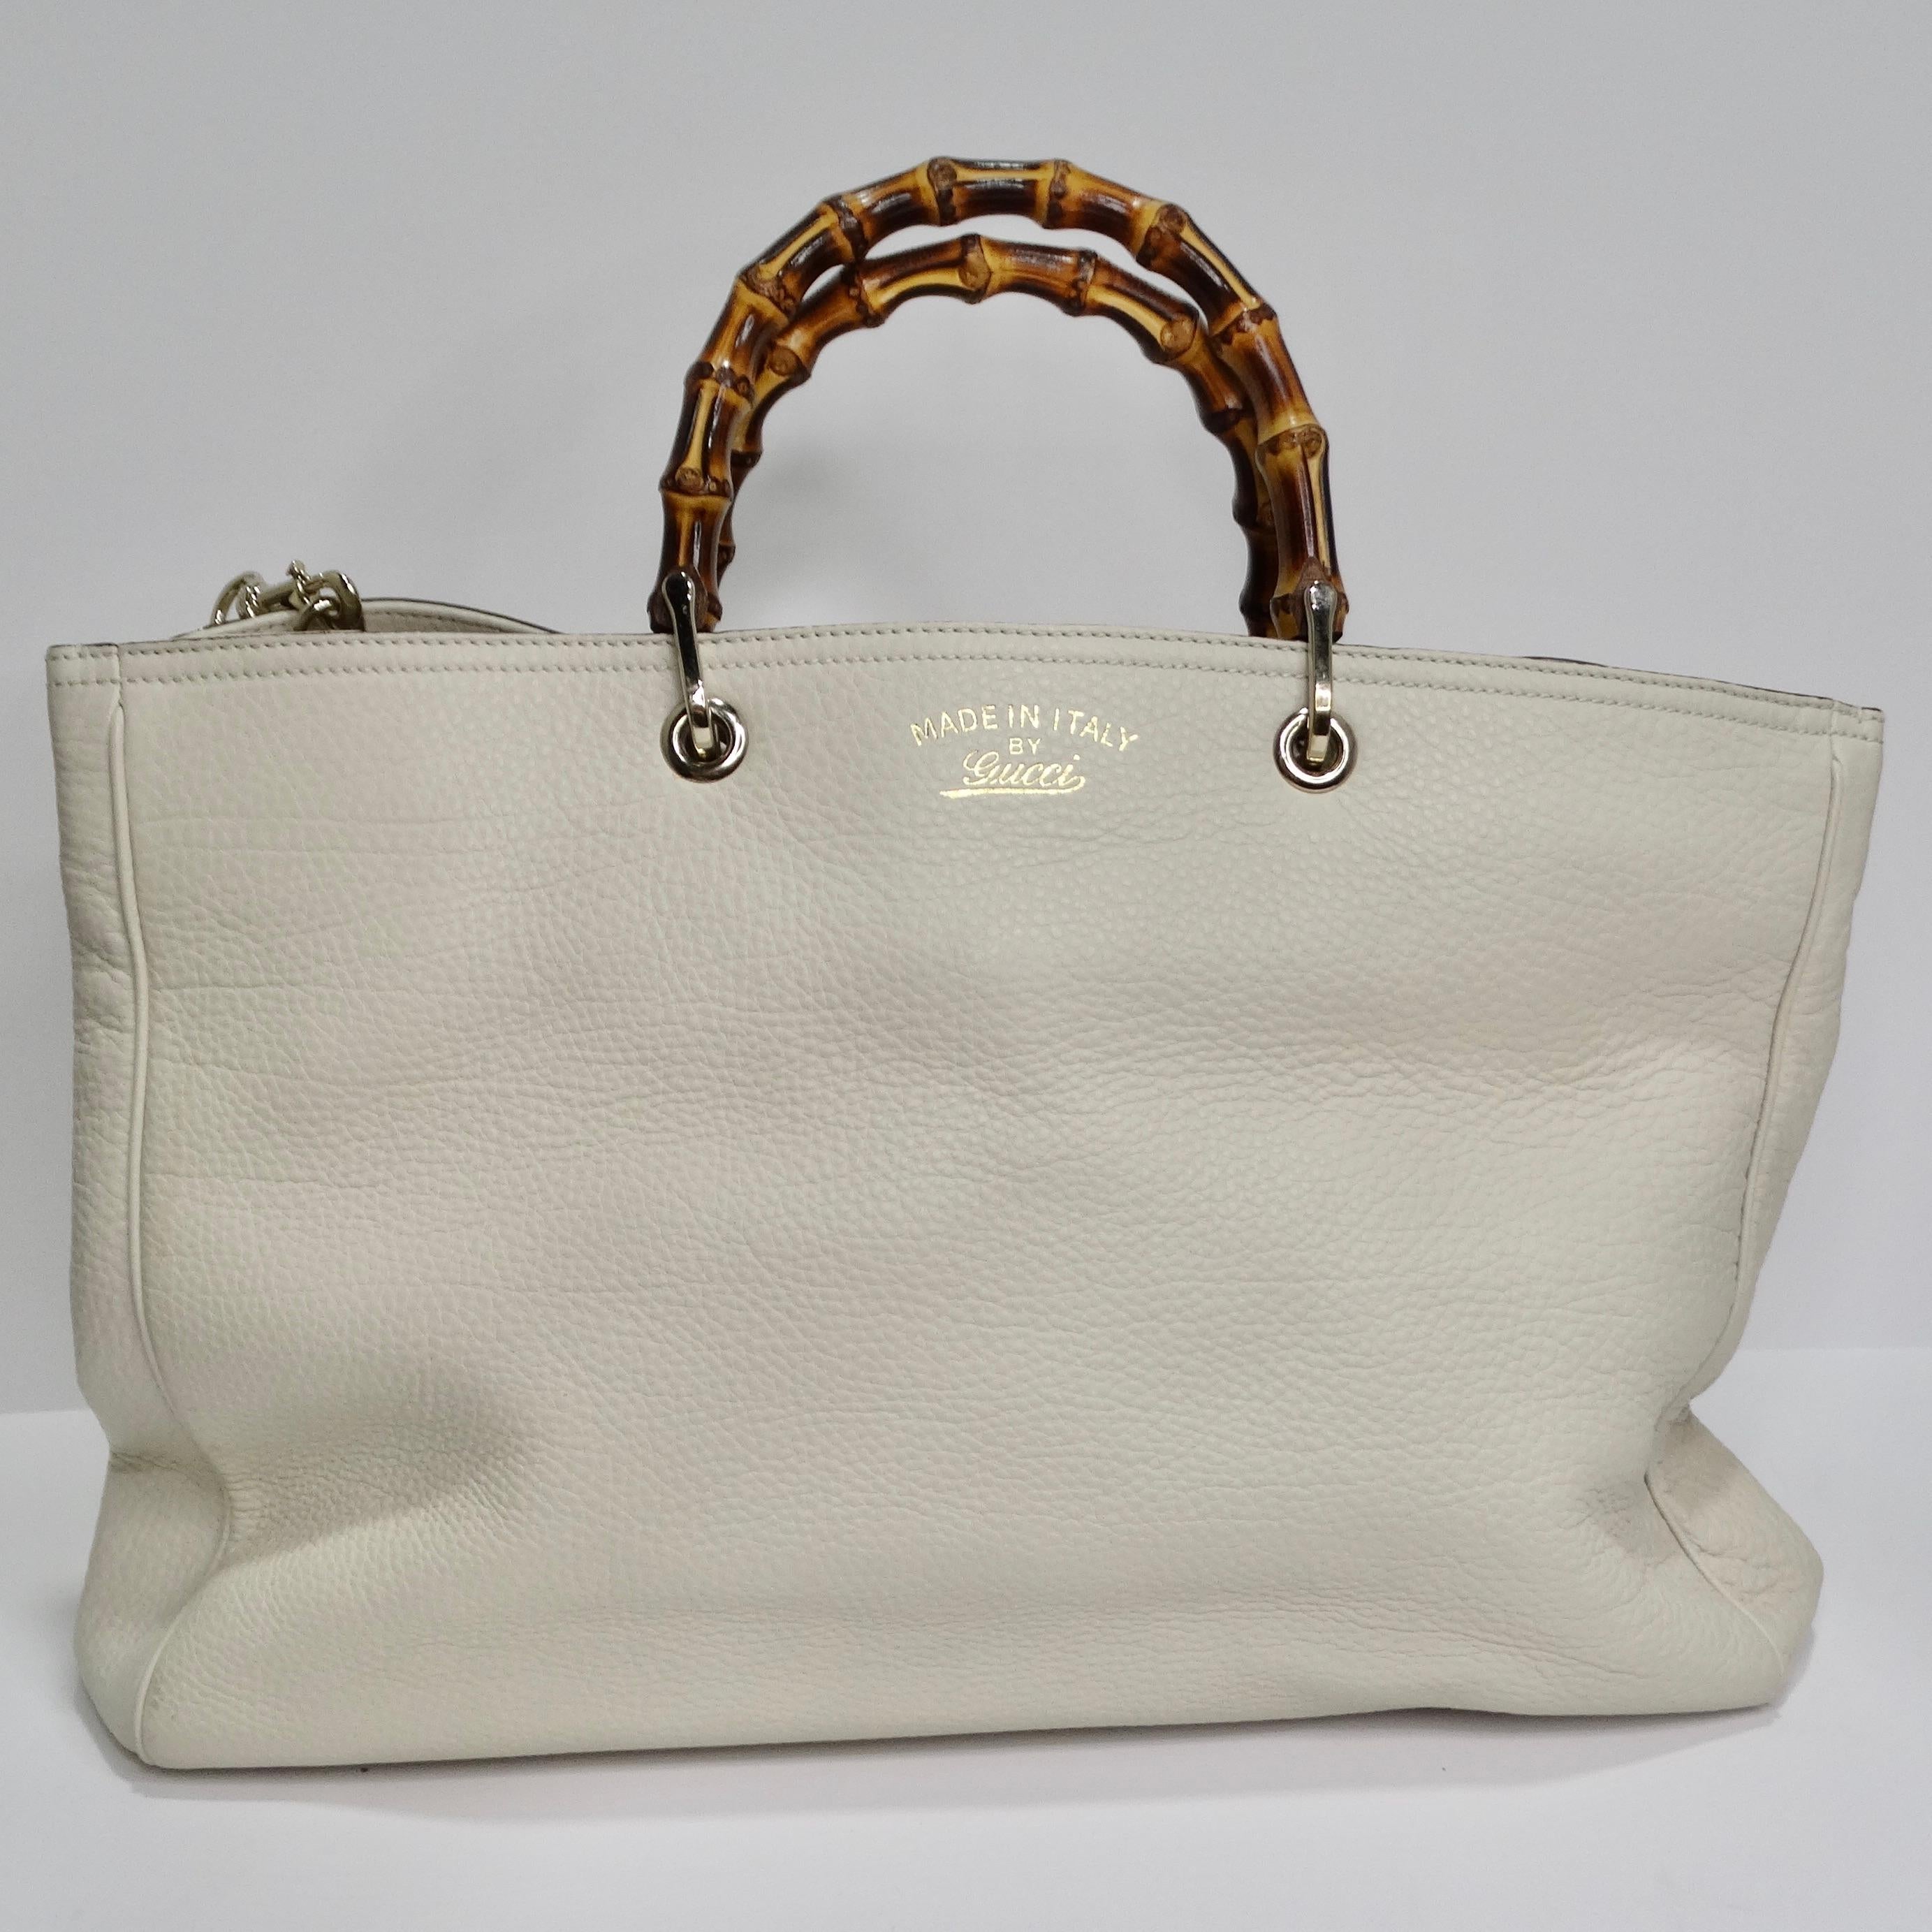 Elevate your style with the iconic Gucci Bamboo Shopper Leather Tote Bag—a true embodiment of luxury, sophistication, and timeless elegance. Crafted with meticulous attention to detail, this large ivory leather tote is a symbol of Gucci's renowned